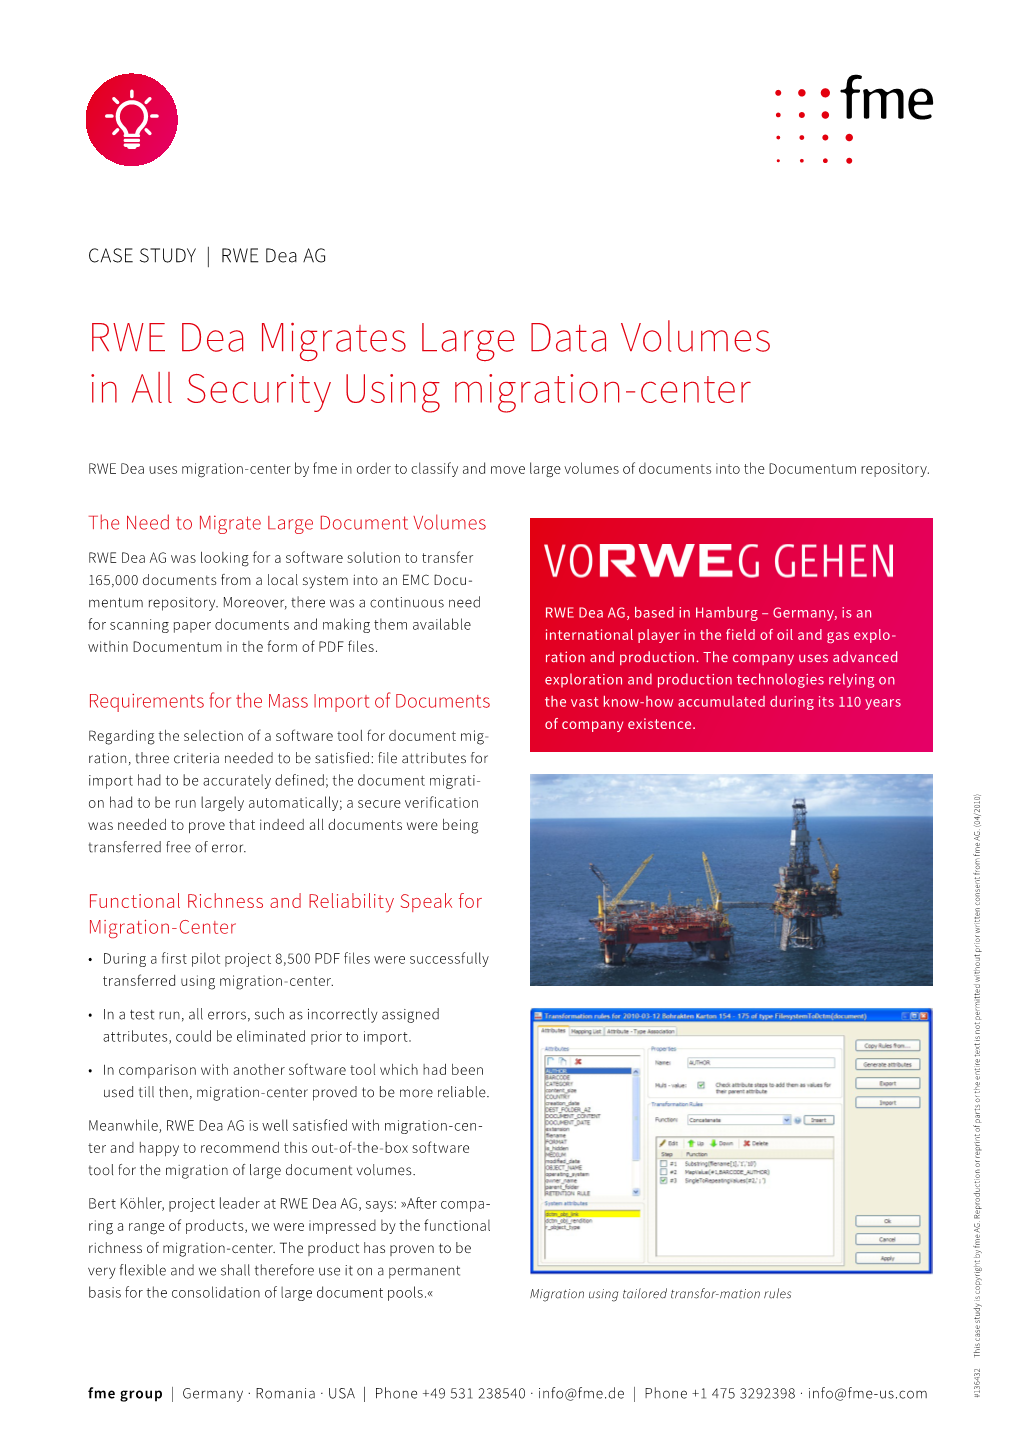 RWE Dea Migrates Large Data Volumes in All Security Using Migration-Center